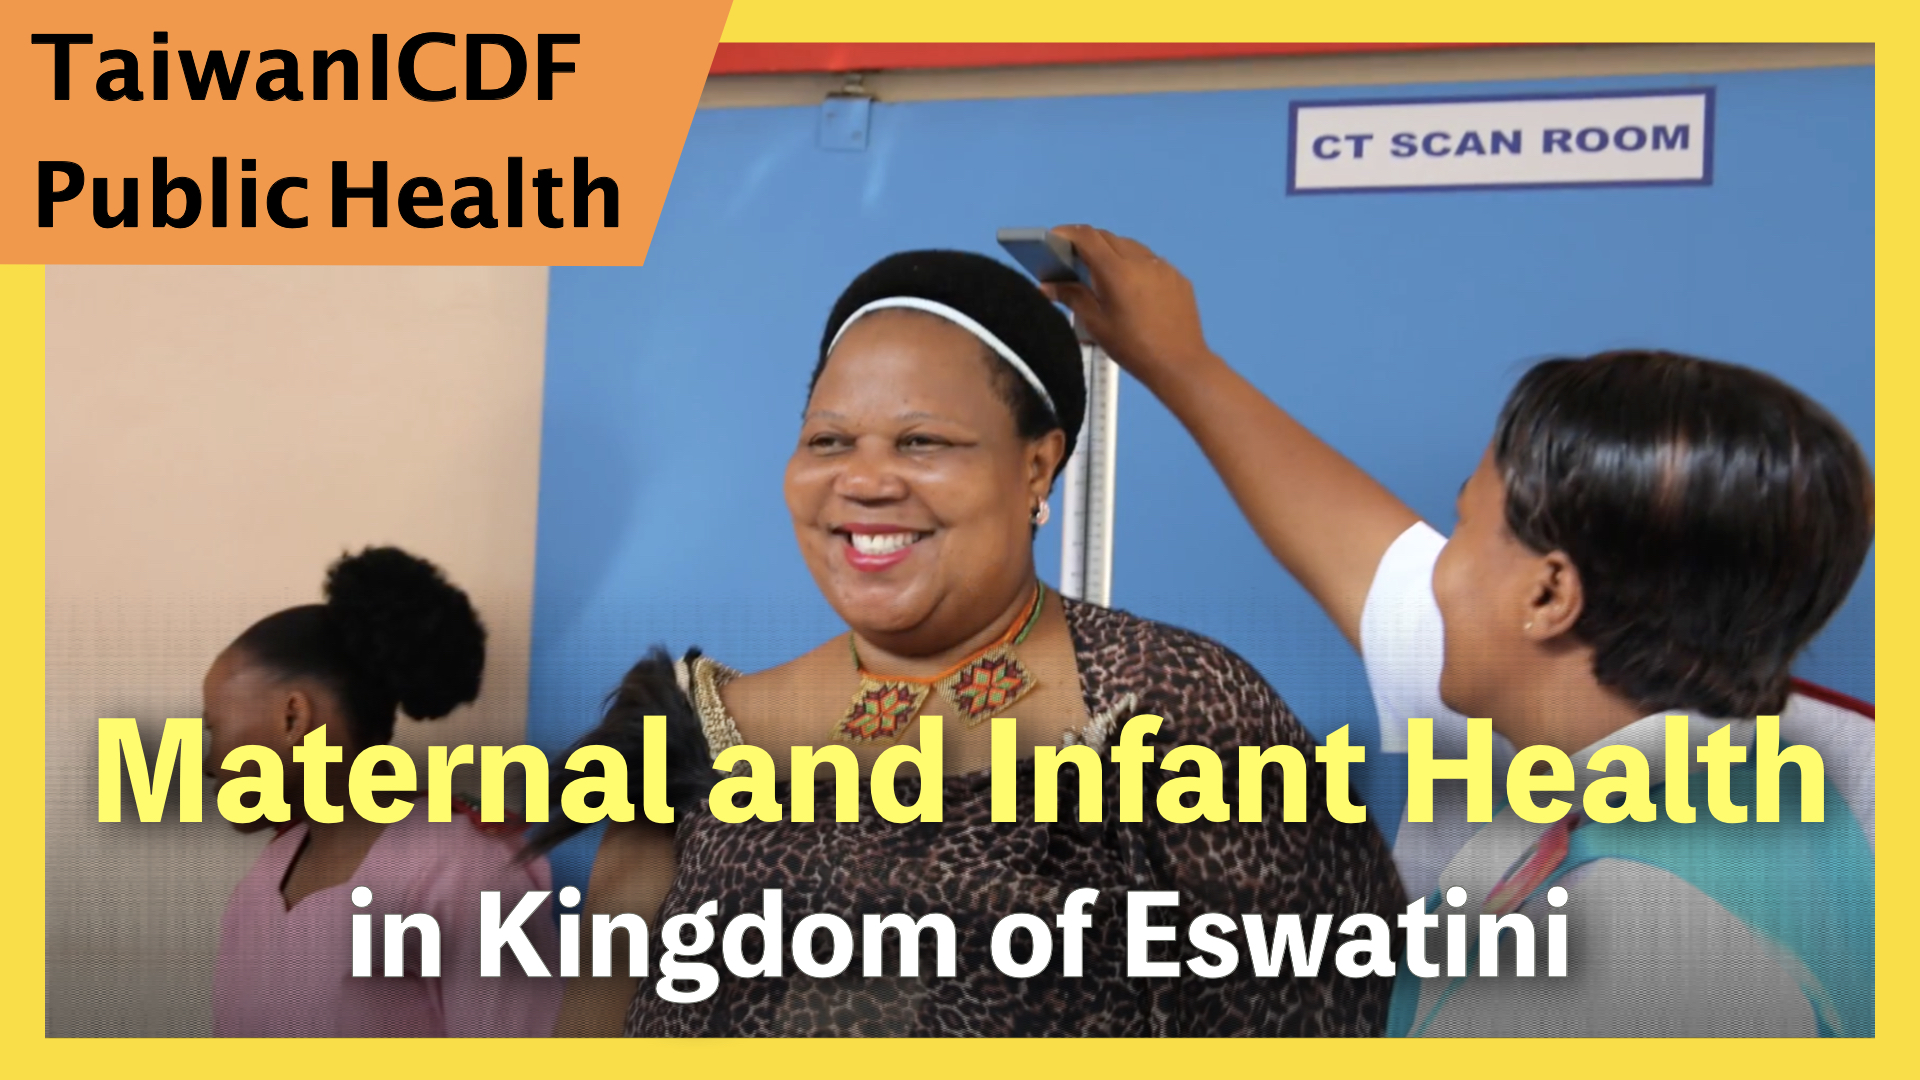 Maternal and Infant Health Care Improvement Project in the Kingdom of Eswatini